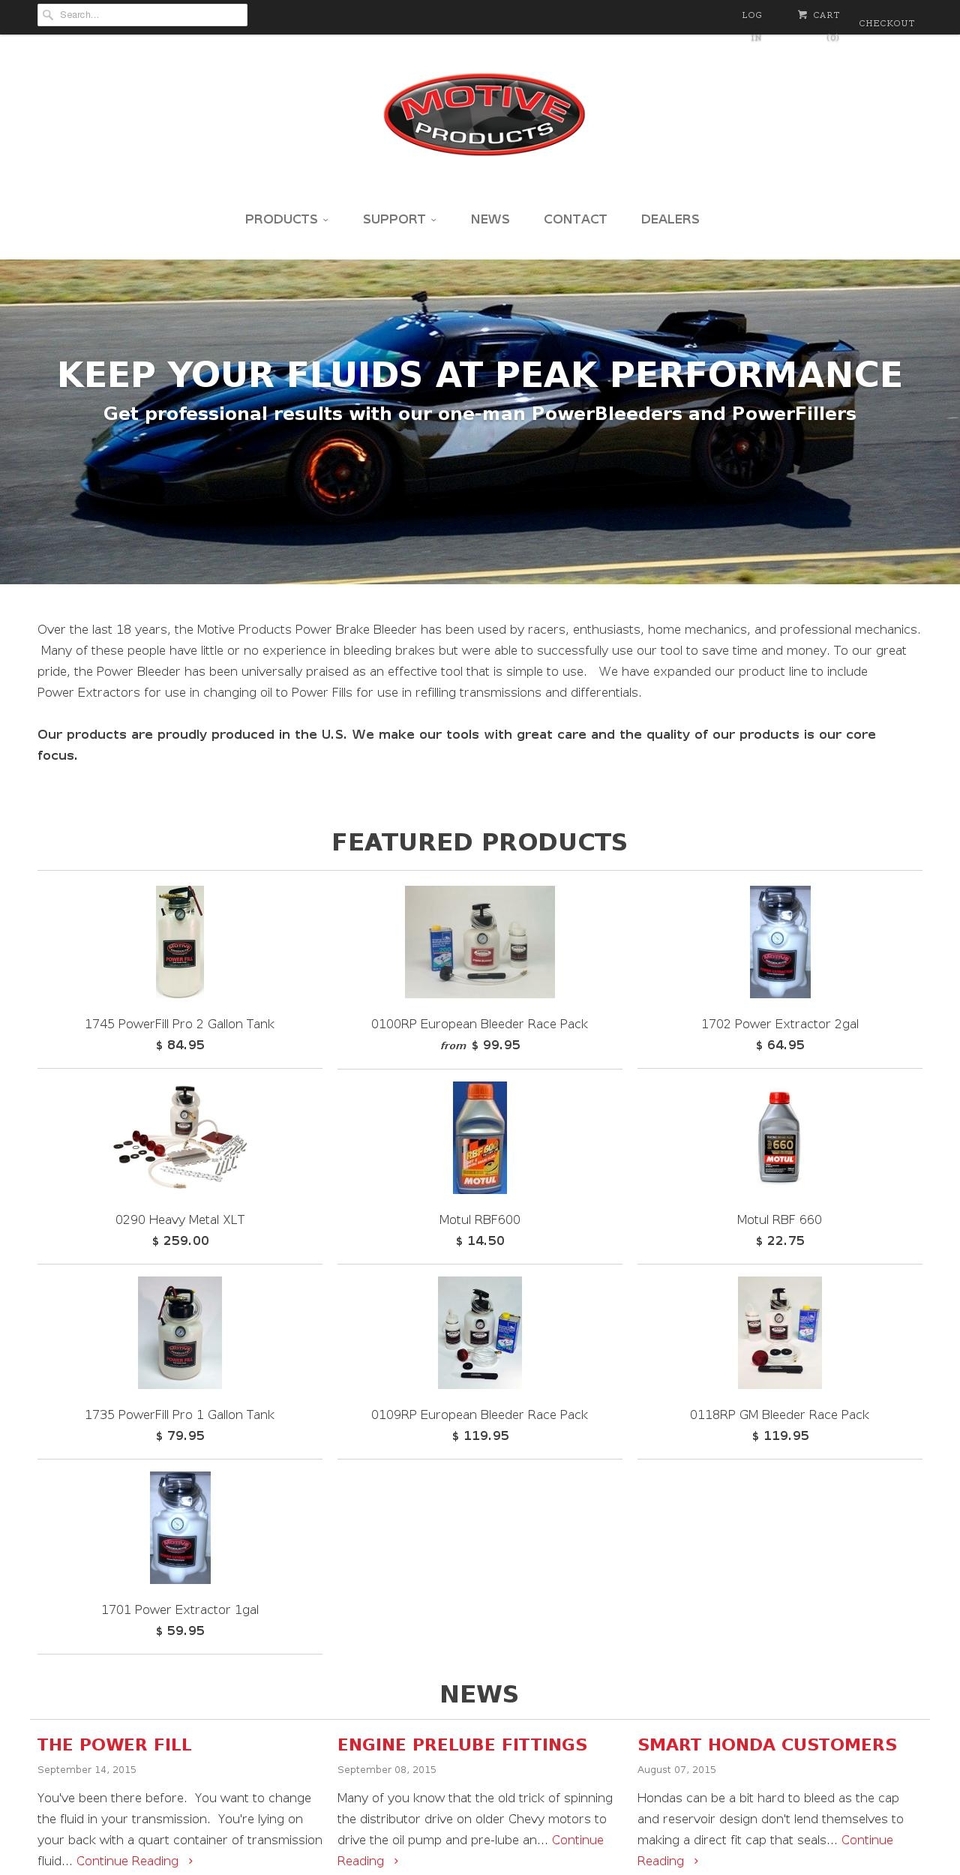 Parallax Shopify theme site example motiveproducts.com